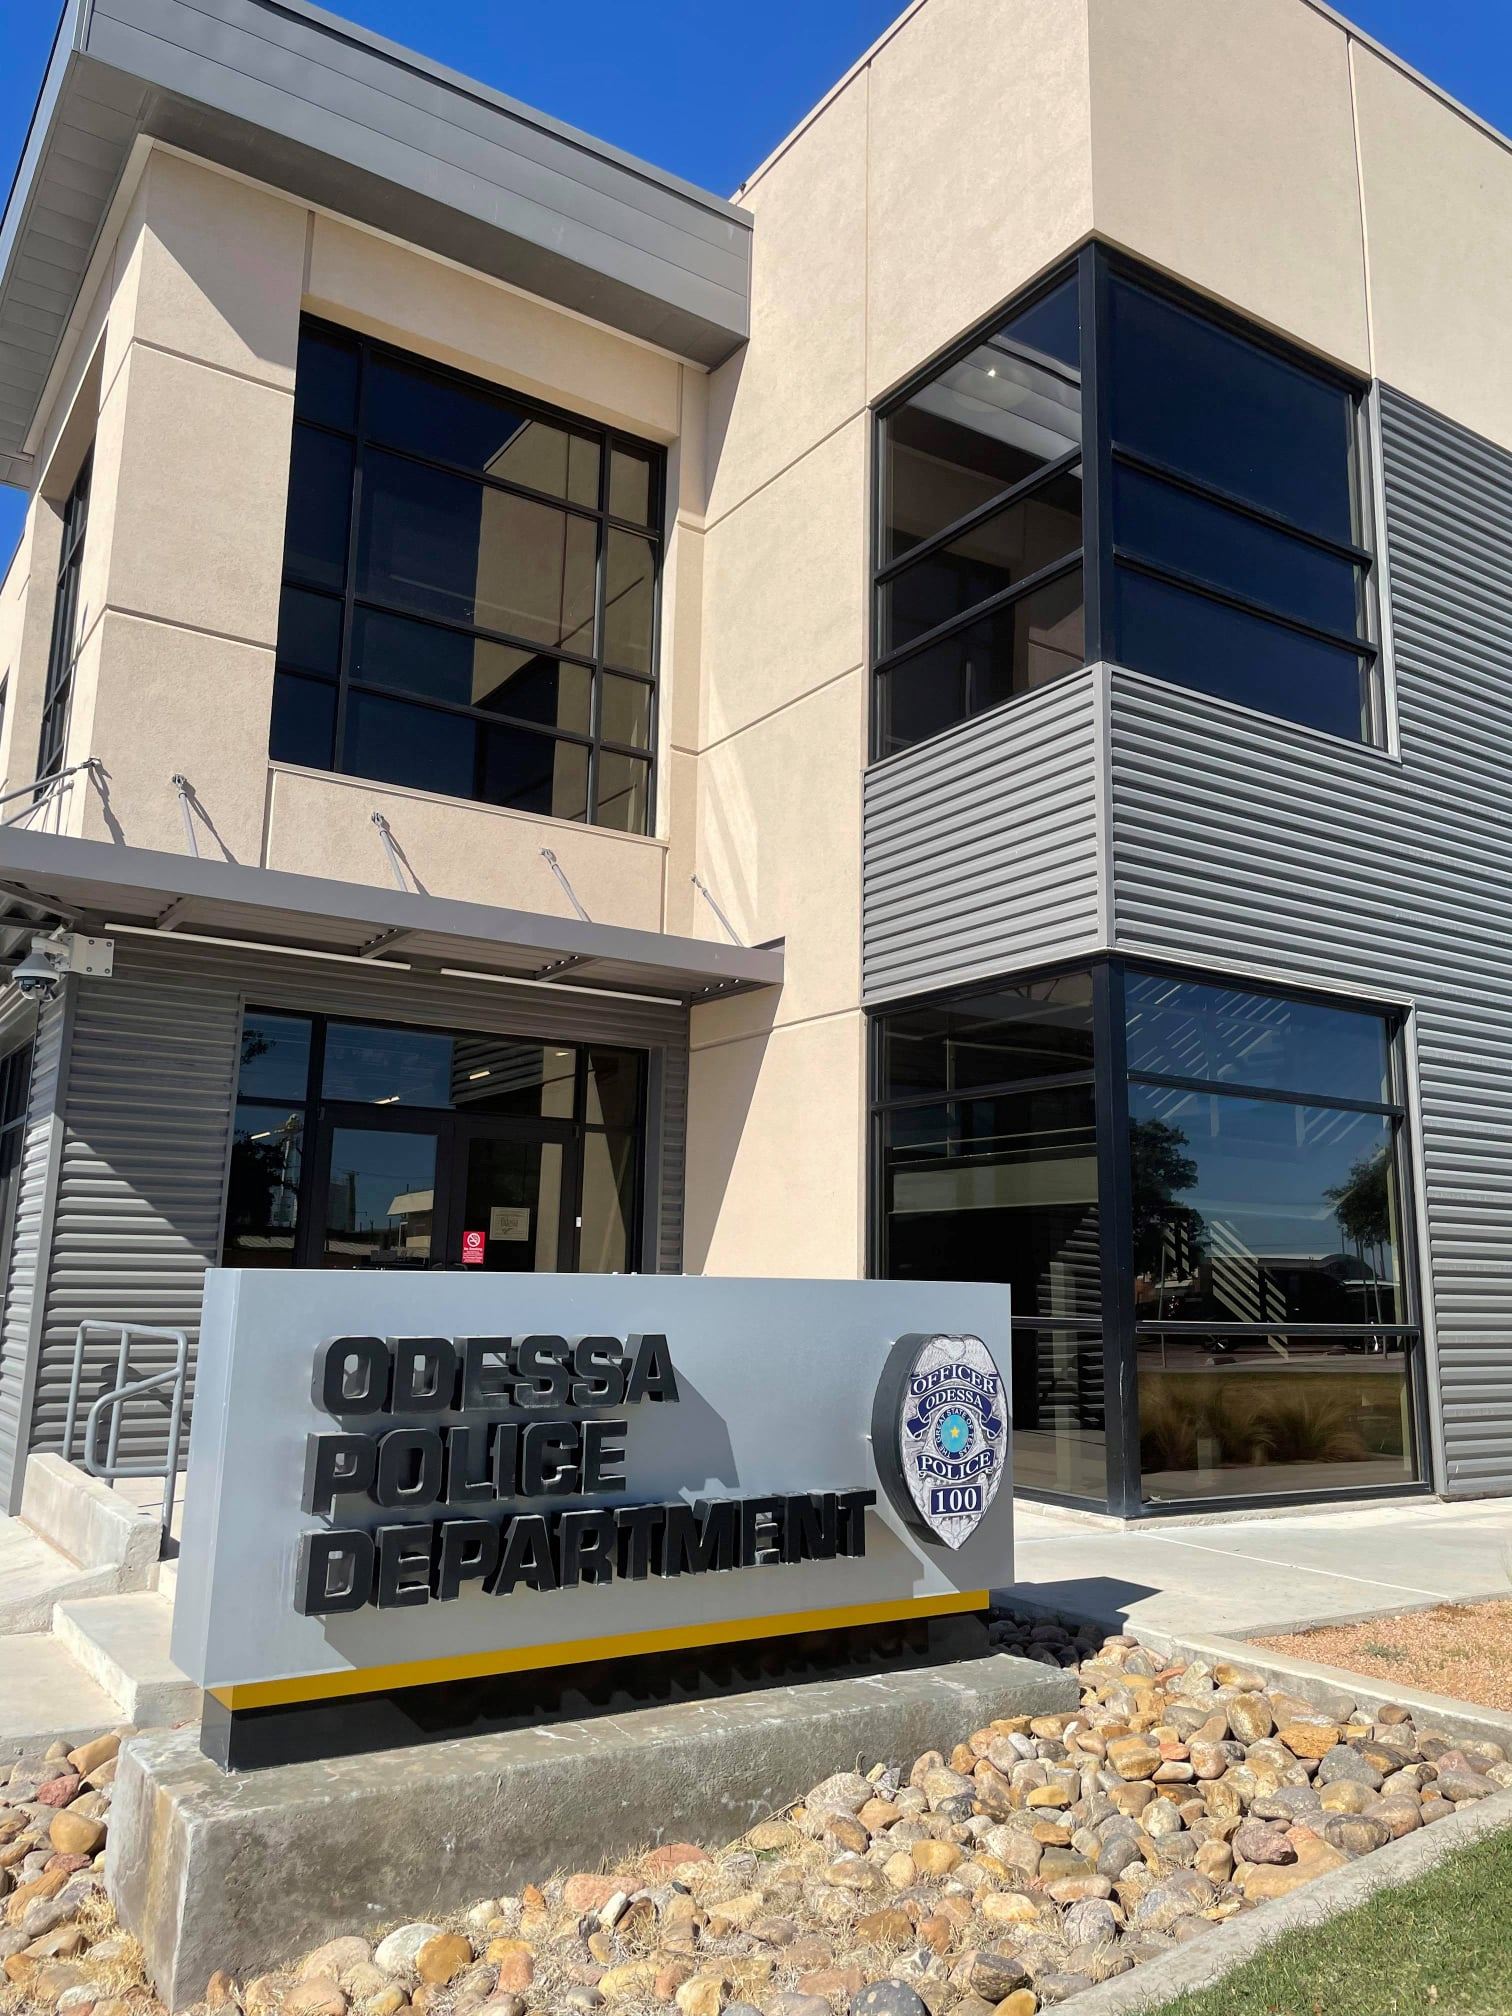 Image of City of Odessa Police Department